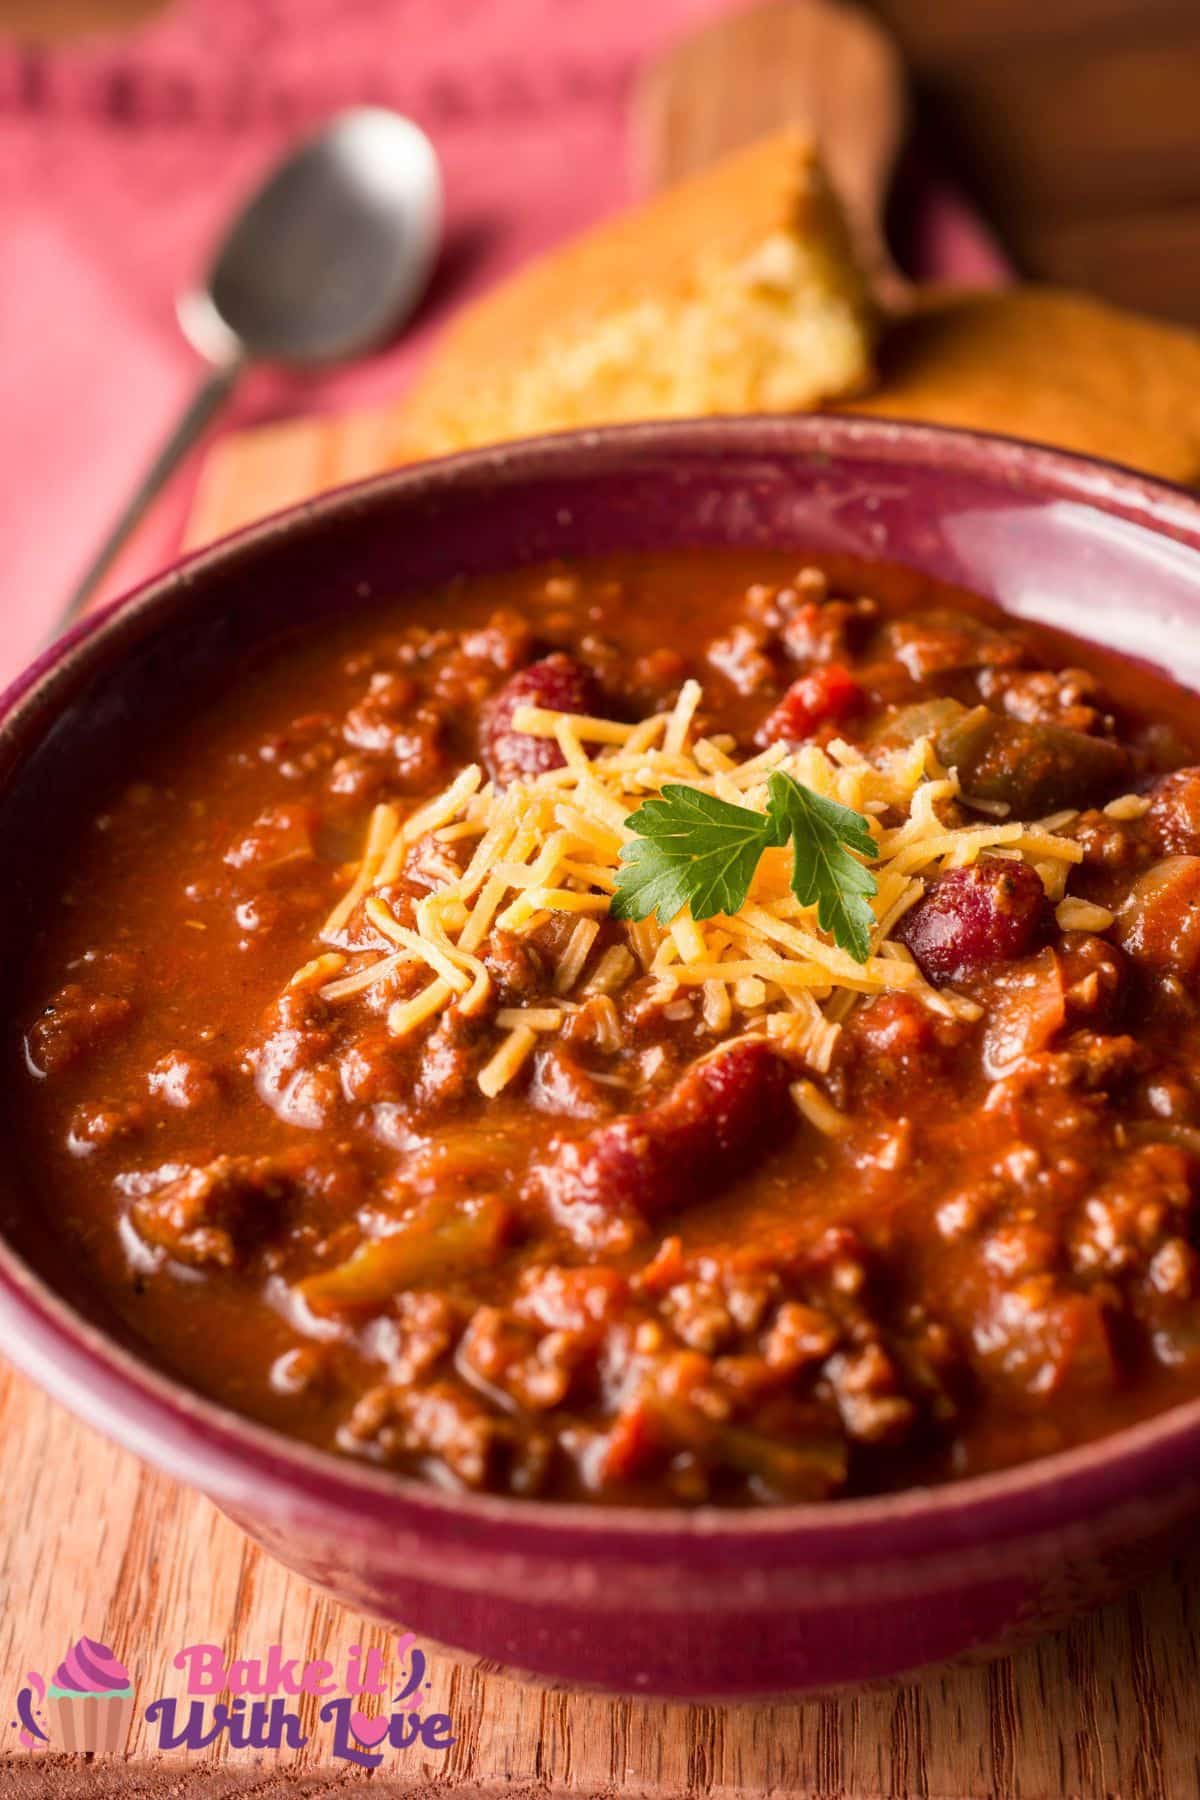 Tall image of the dished up homemade chili in maroon bowl.